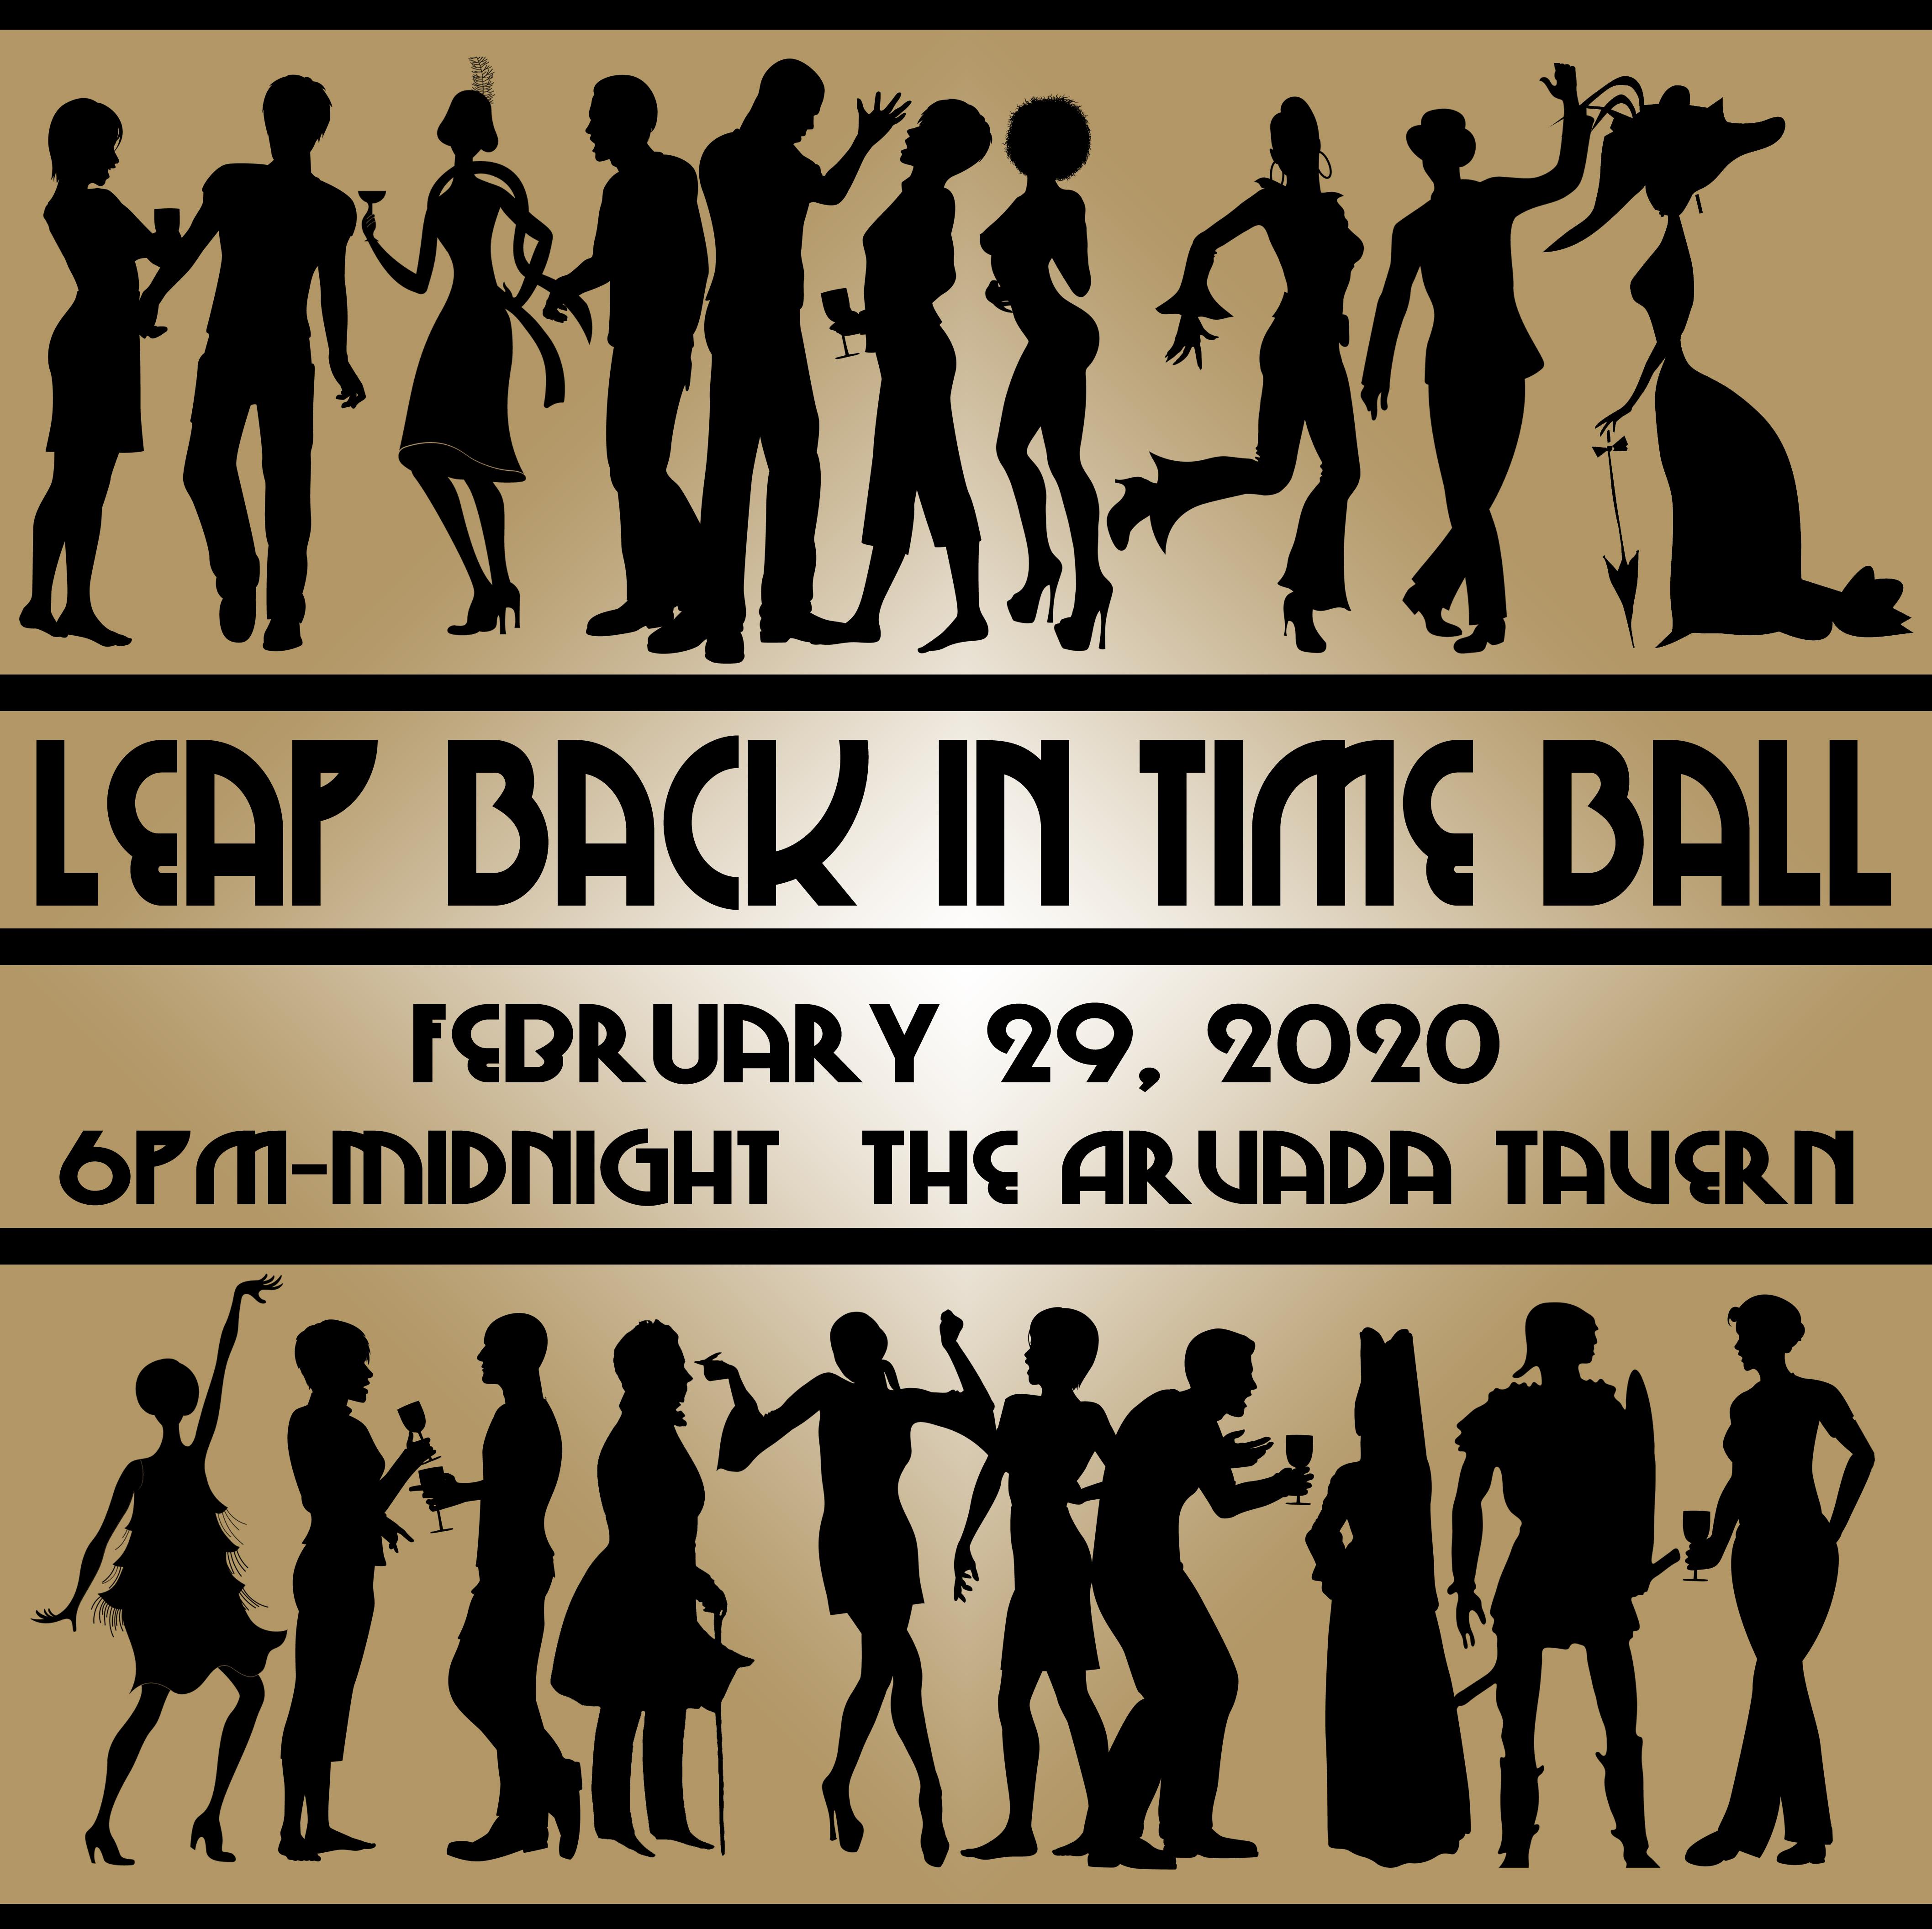 Leap Back in Time Ball